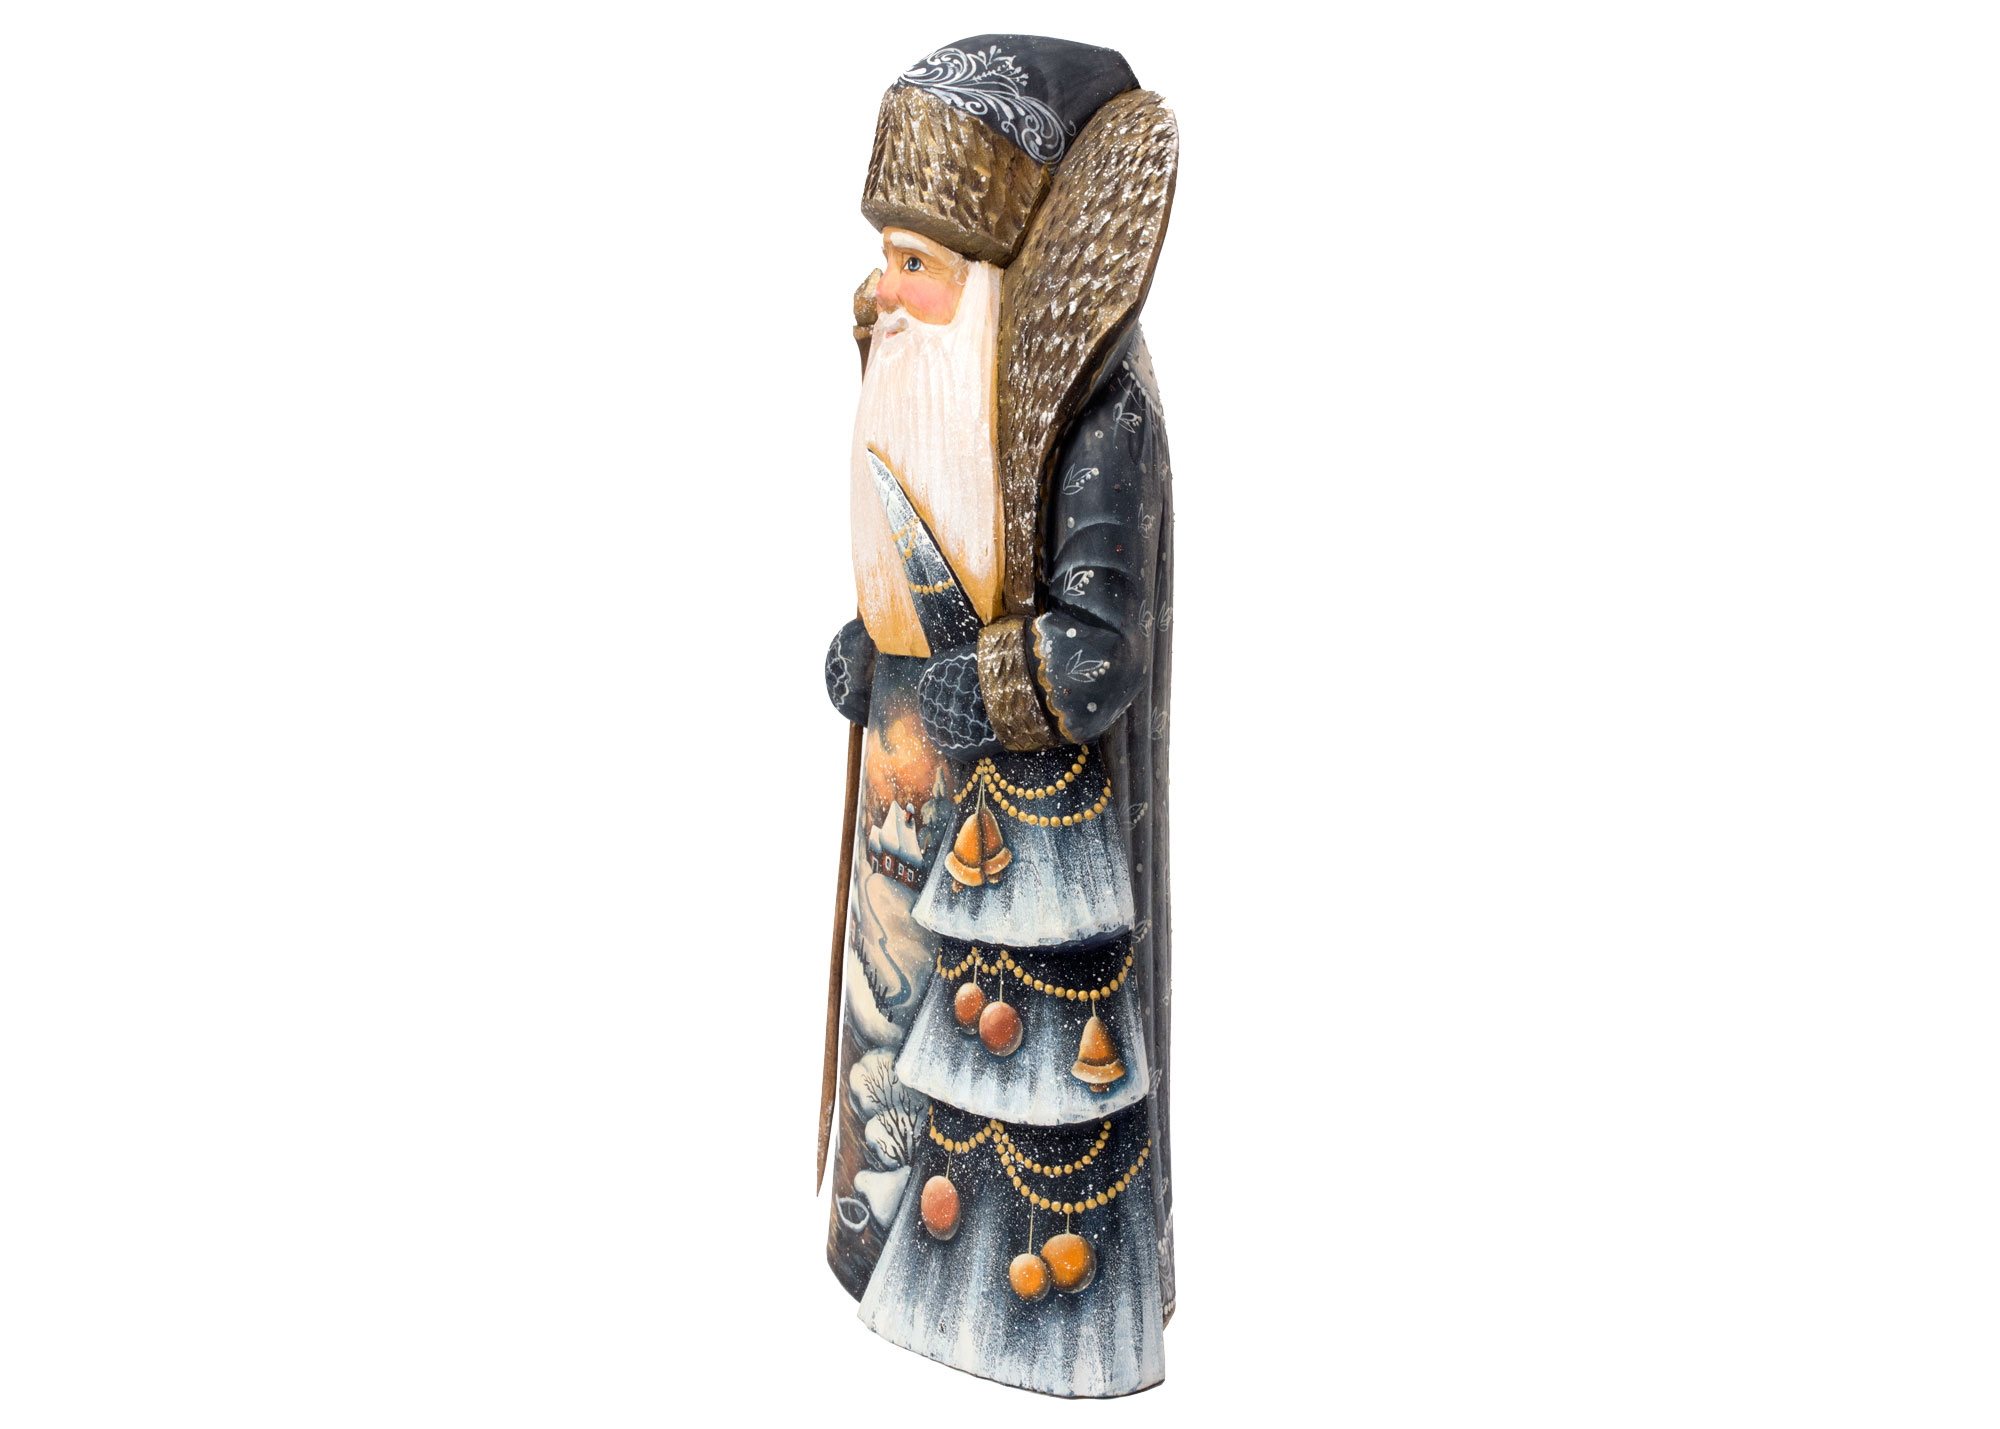 Buy Father Frost Brings the Tree Carving at GoldenCockerel.com